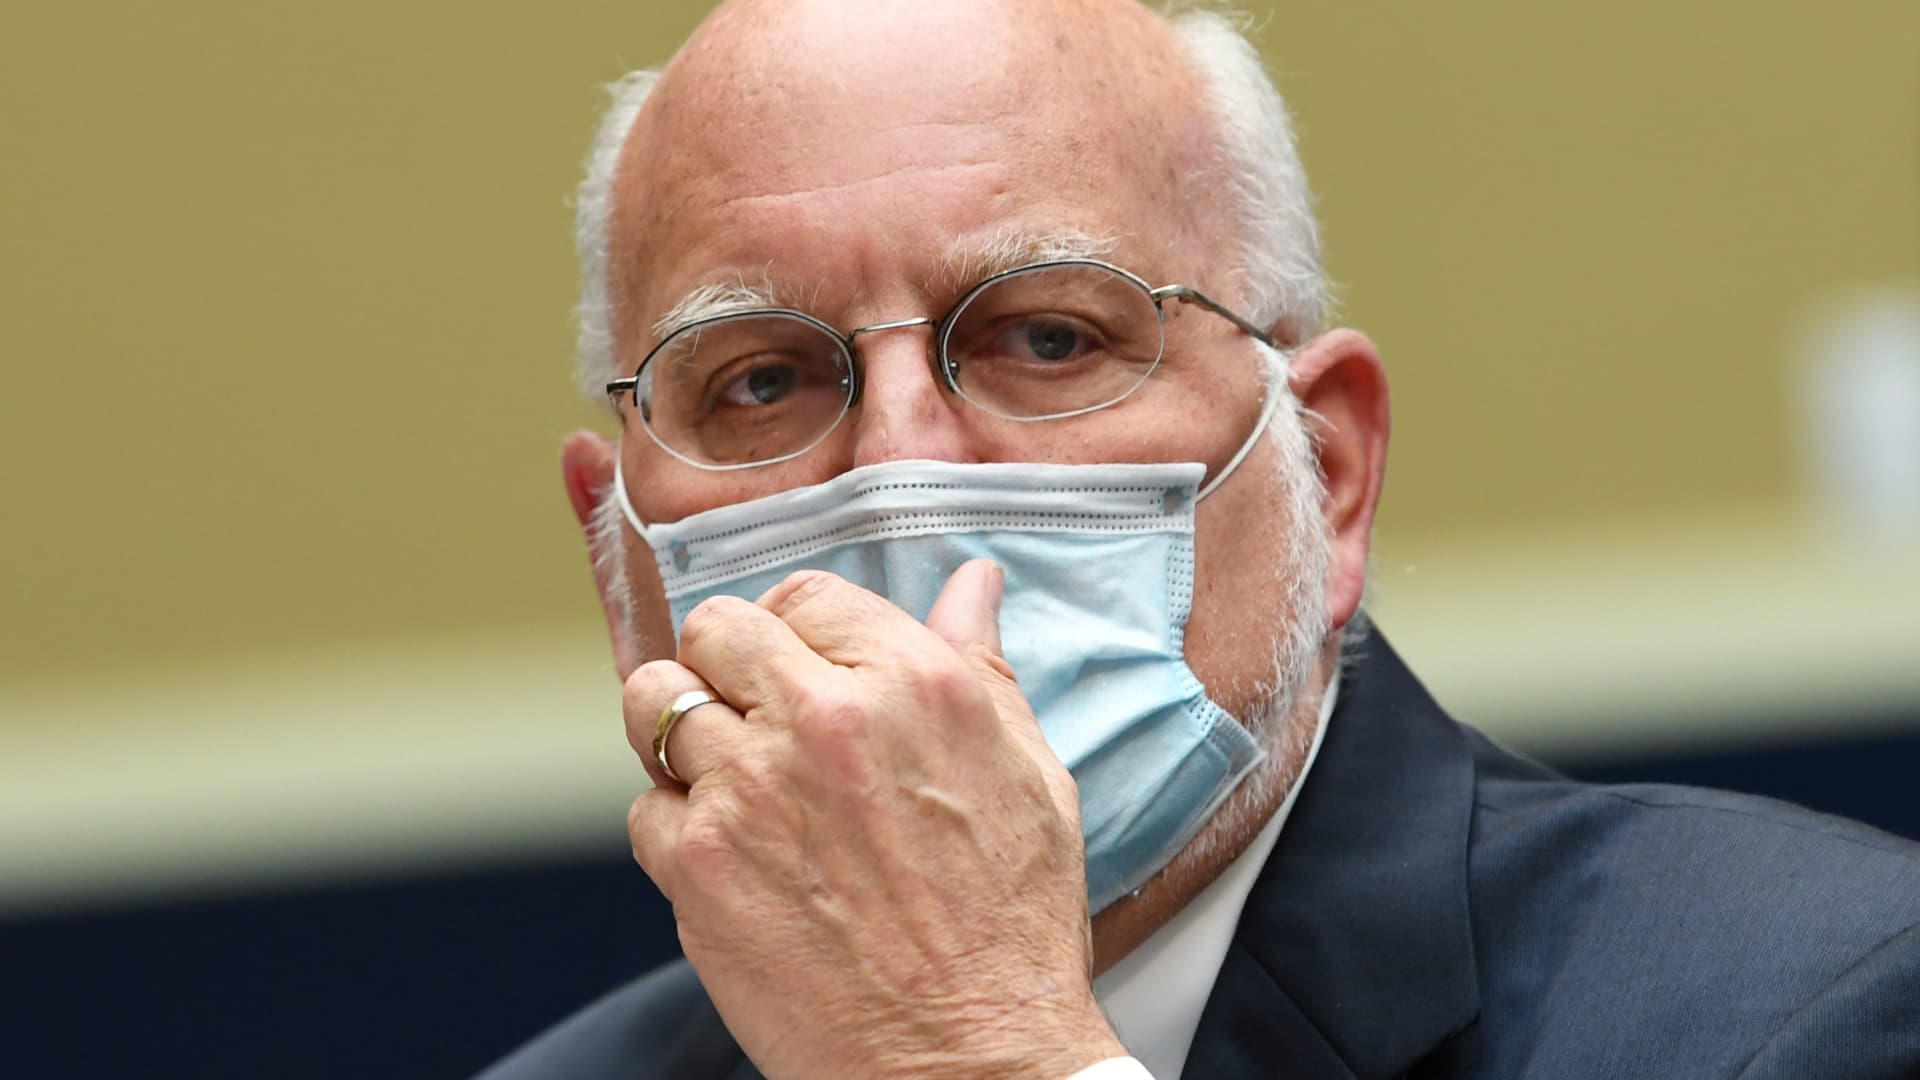 Director of the Centers for Disease Control and Prevention Dr. Robert Redfield wears a face mask while he waits to testify before the House Committee on Energy and Commerce on the Trump Administration's Response to the COVID-19 Pandemic, on Capitol Hill in Washington, DC, U.S. June 23, 2020.